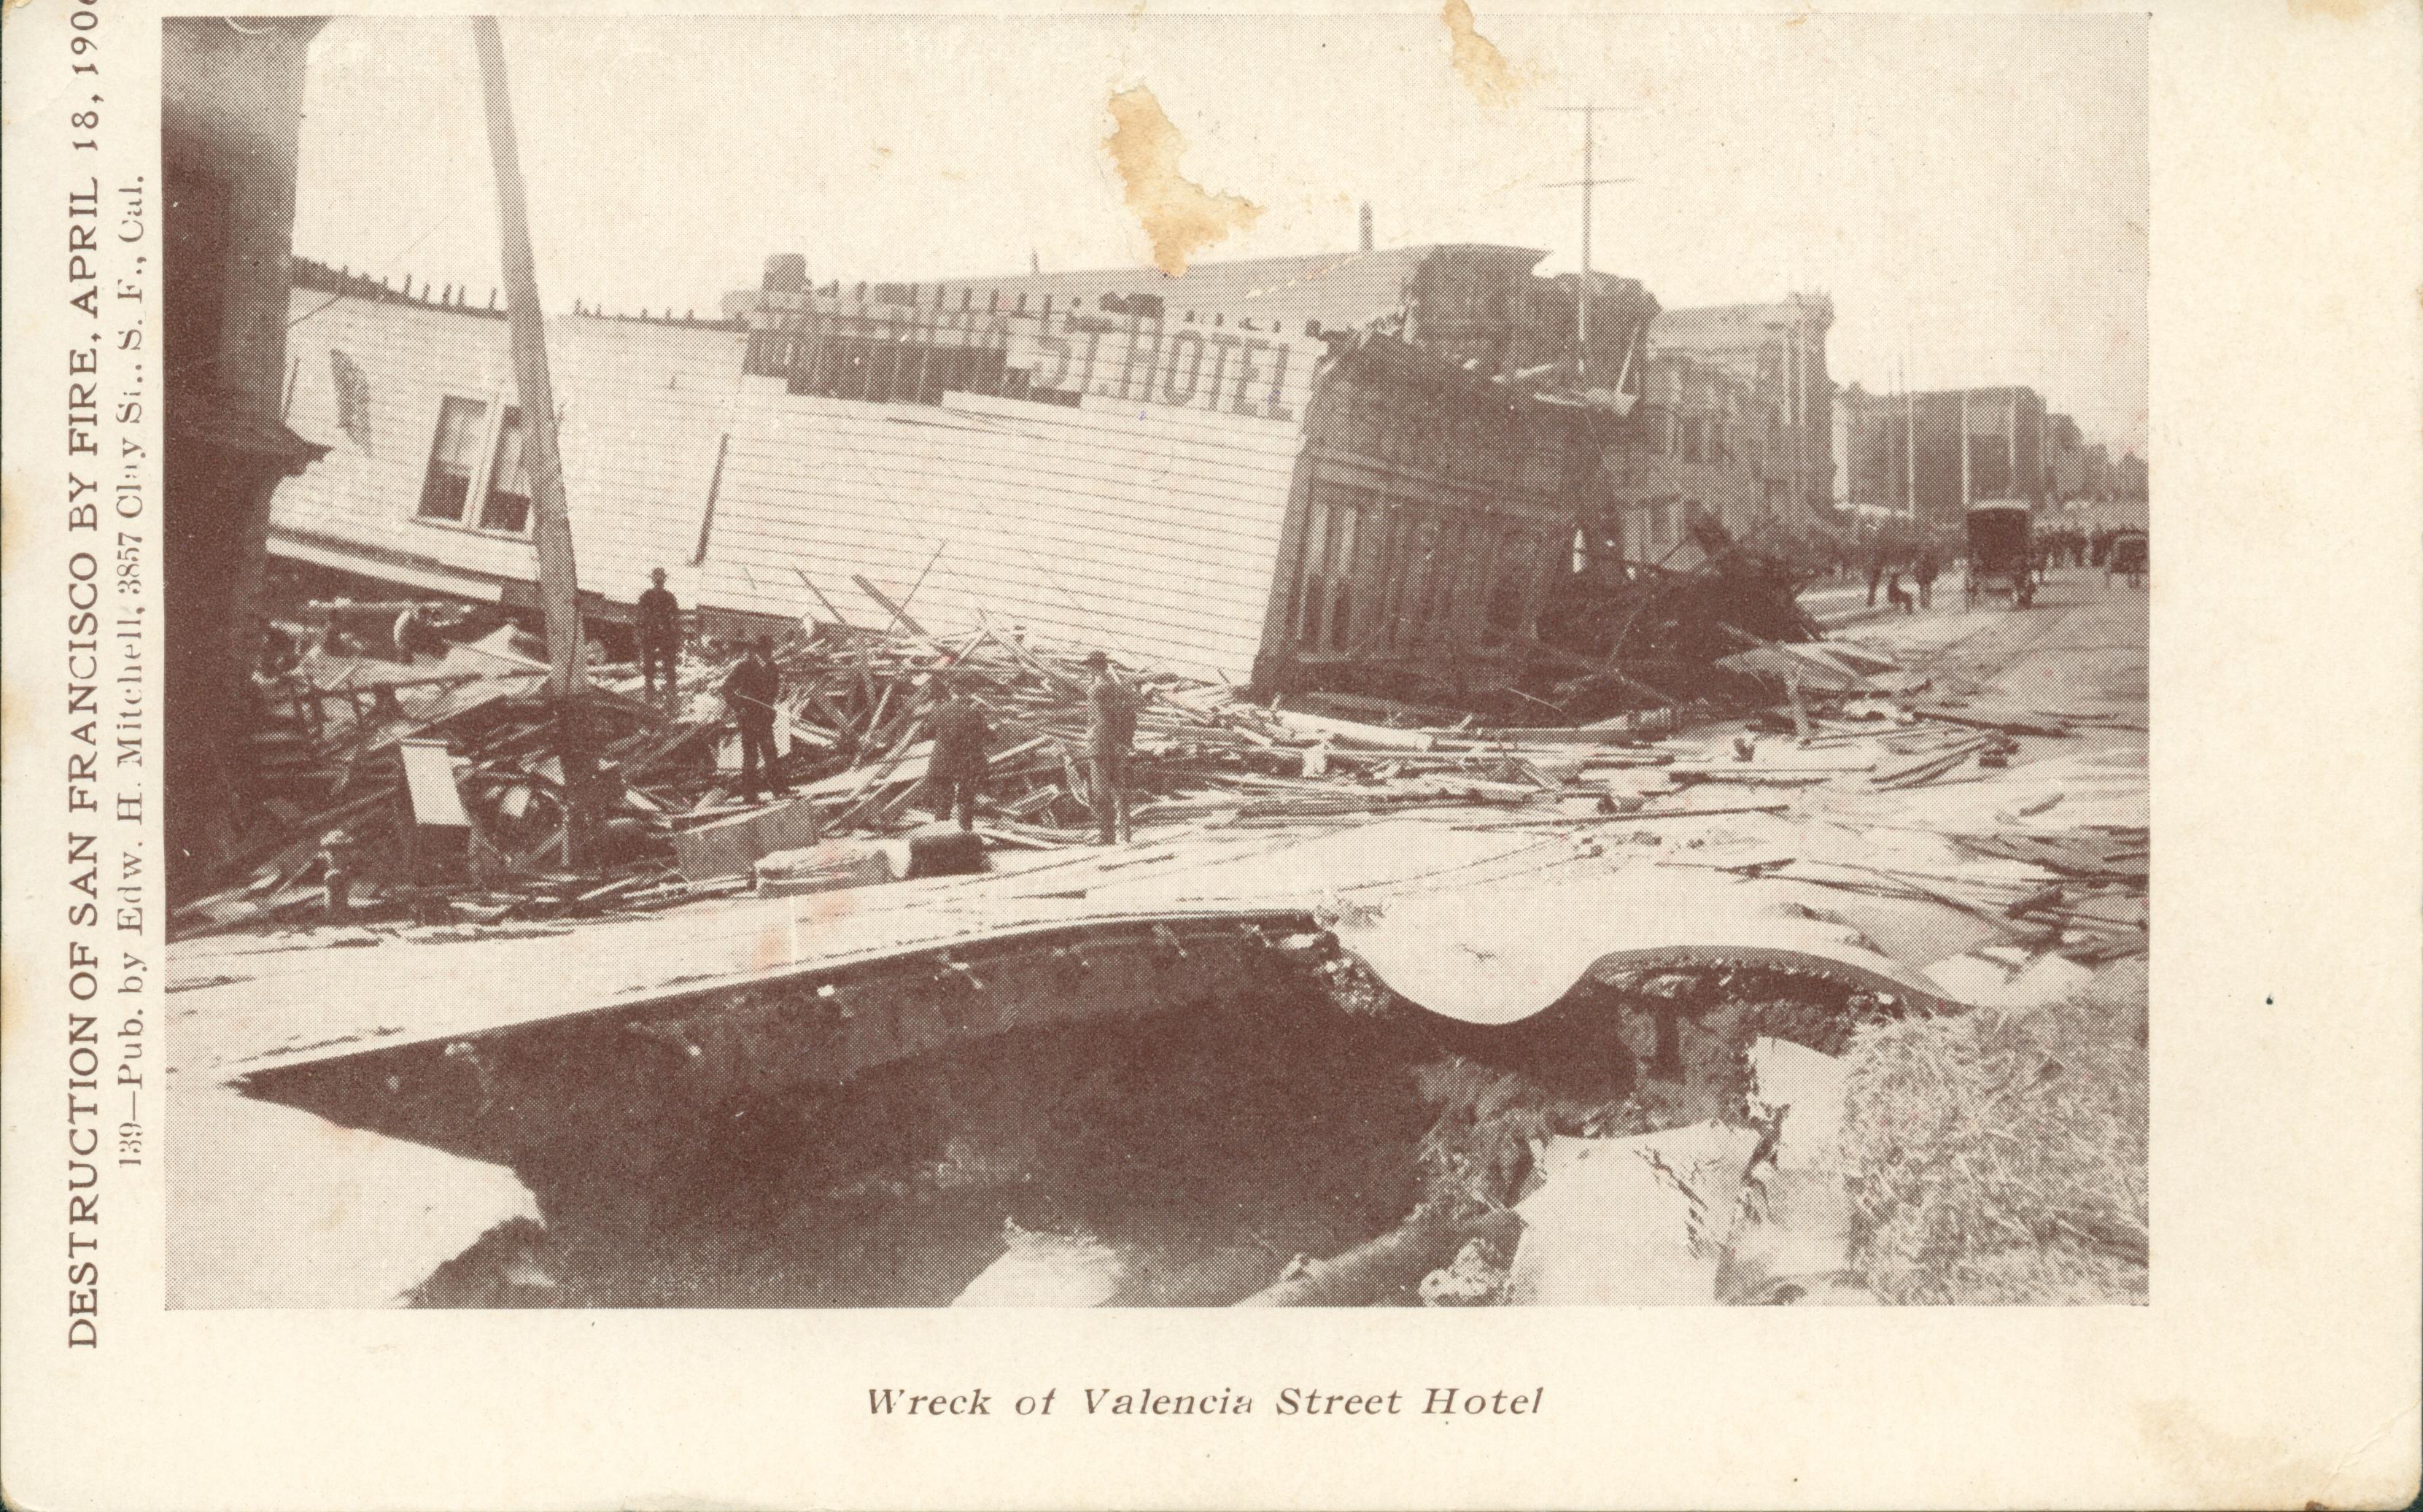 Shows the Valencia Street hotel, collapsing onto the street, surrounded by other buildings